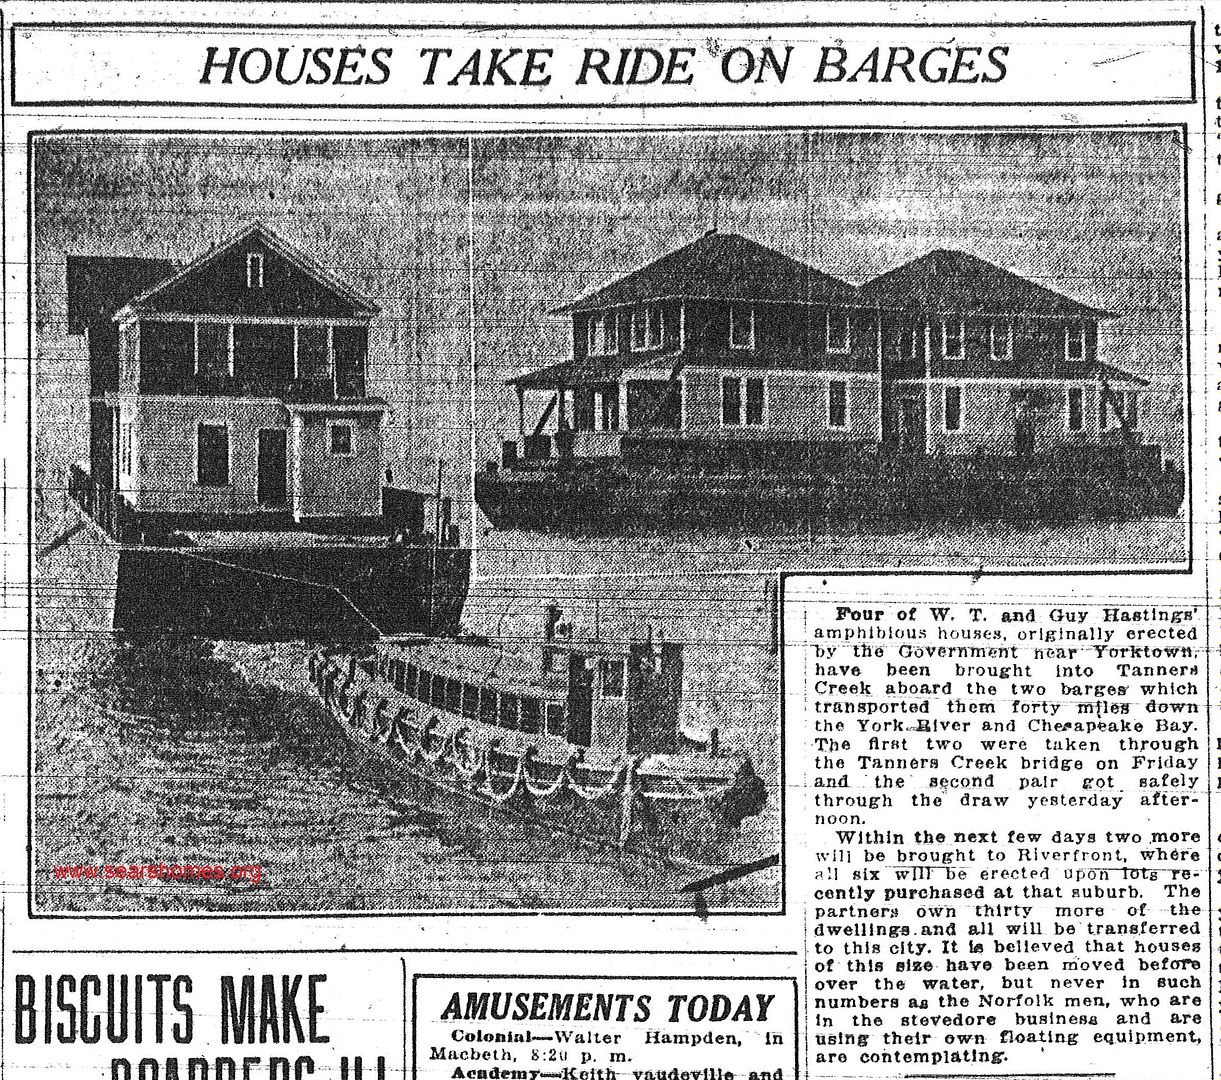 The houses were shipped from Penniman by barge. 